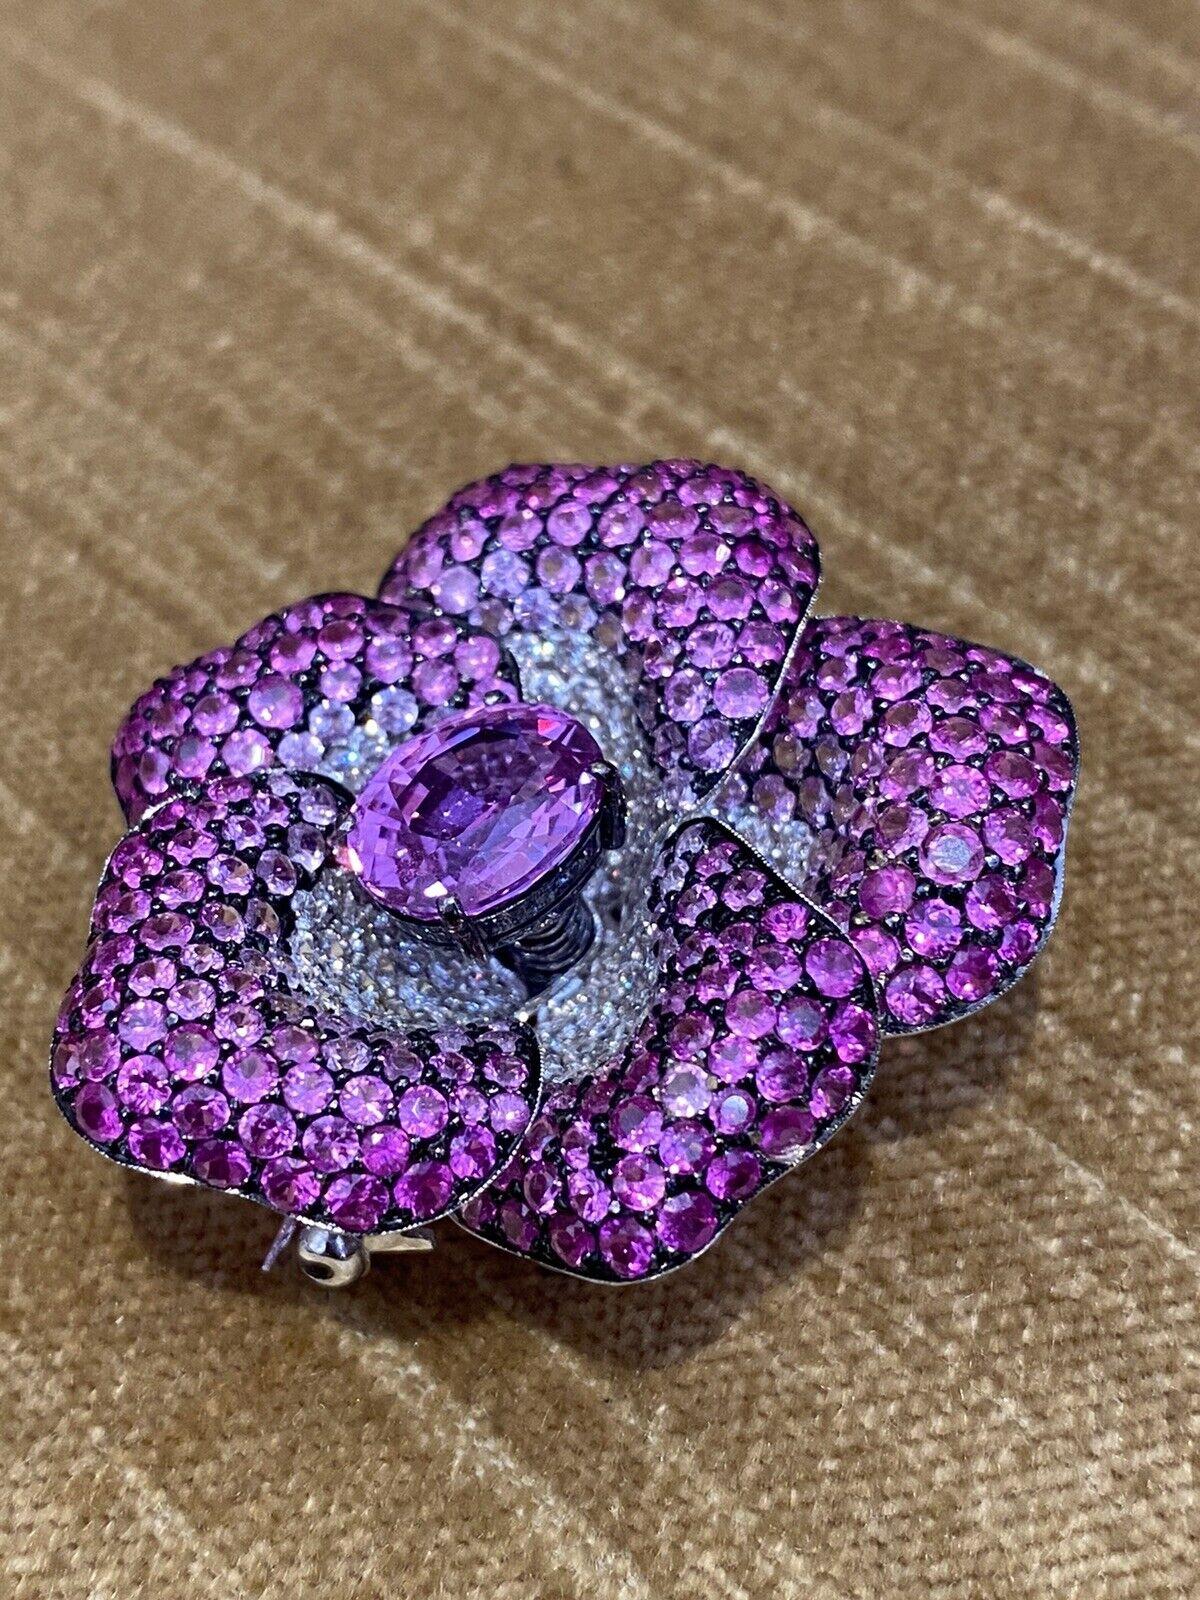 GIA Certified Pink Sapphire and Diamond Flower Pin/Brooch in 18k White Gold

Diamond and Sapphire Flower Pin features a 4.37 carat Natural Oval Purplish Pink Sapphire in the center, surrounded by Pave set Round Diamonds and Pink Sapphires graduating